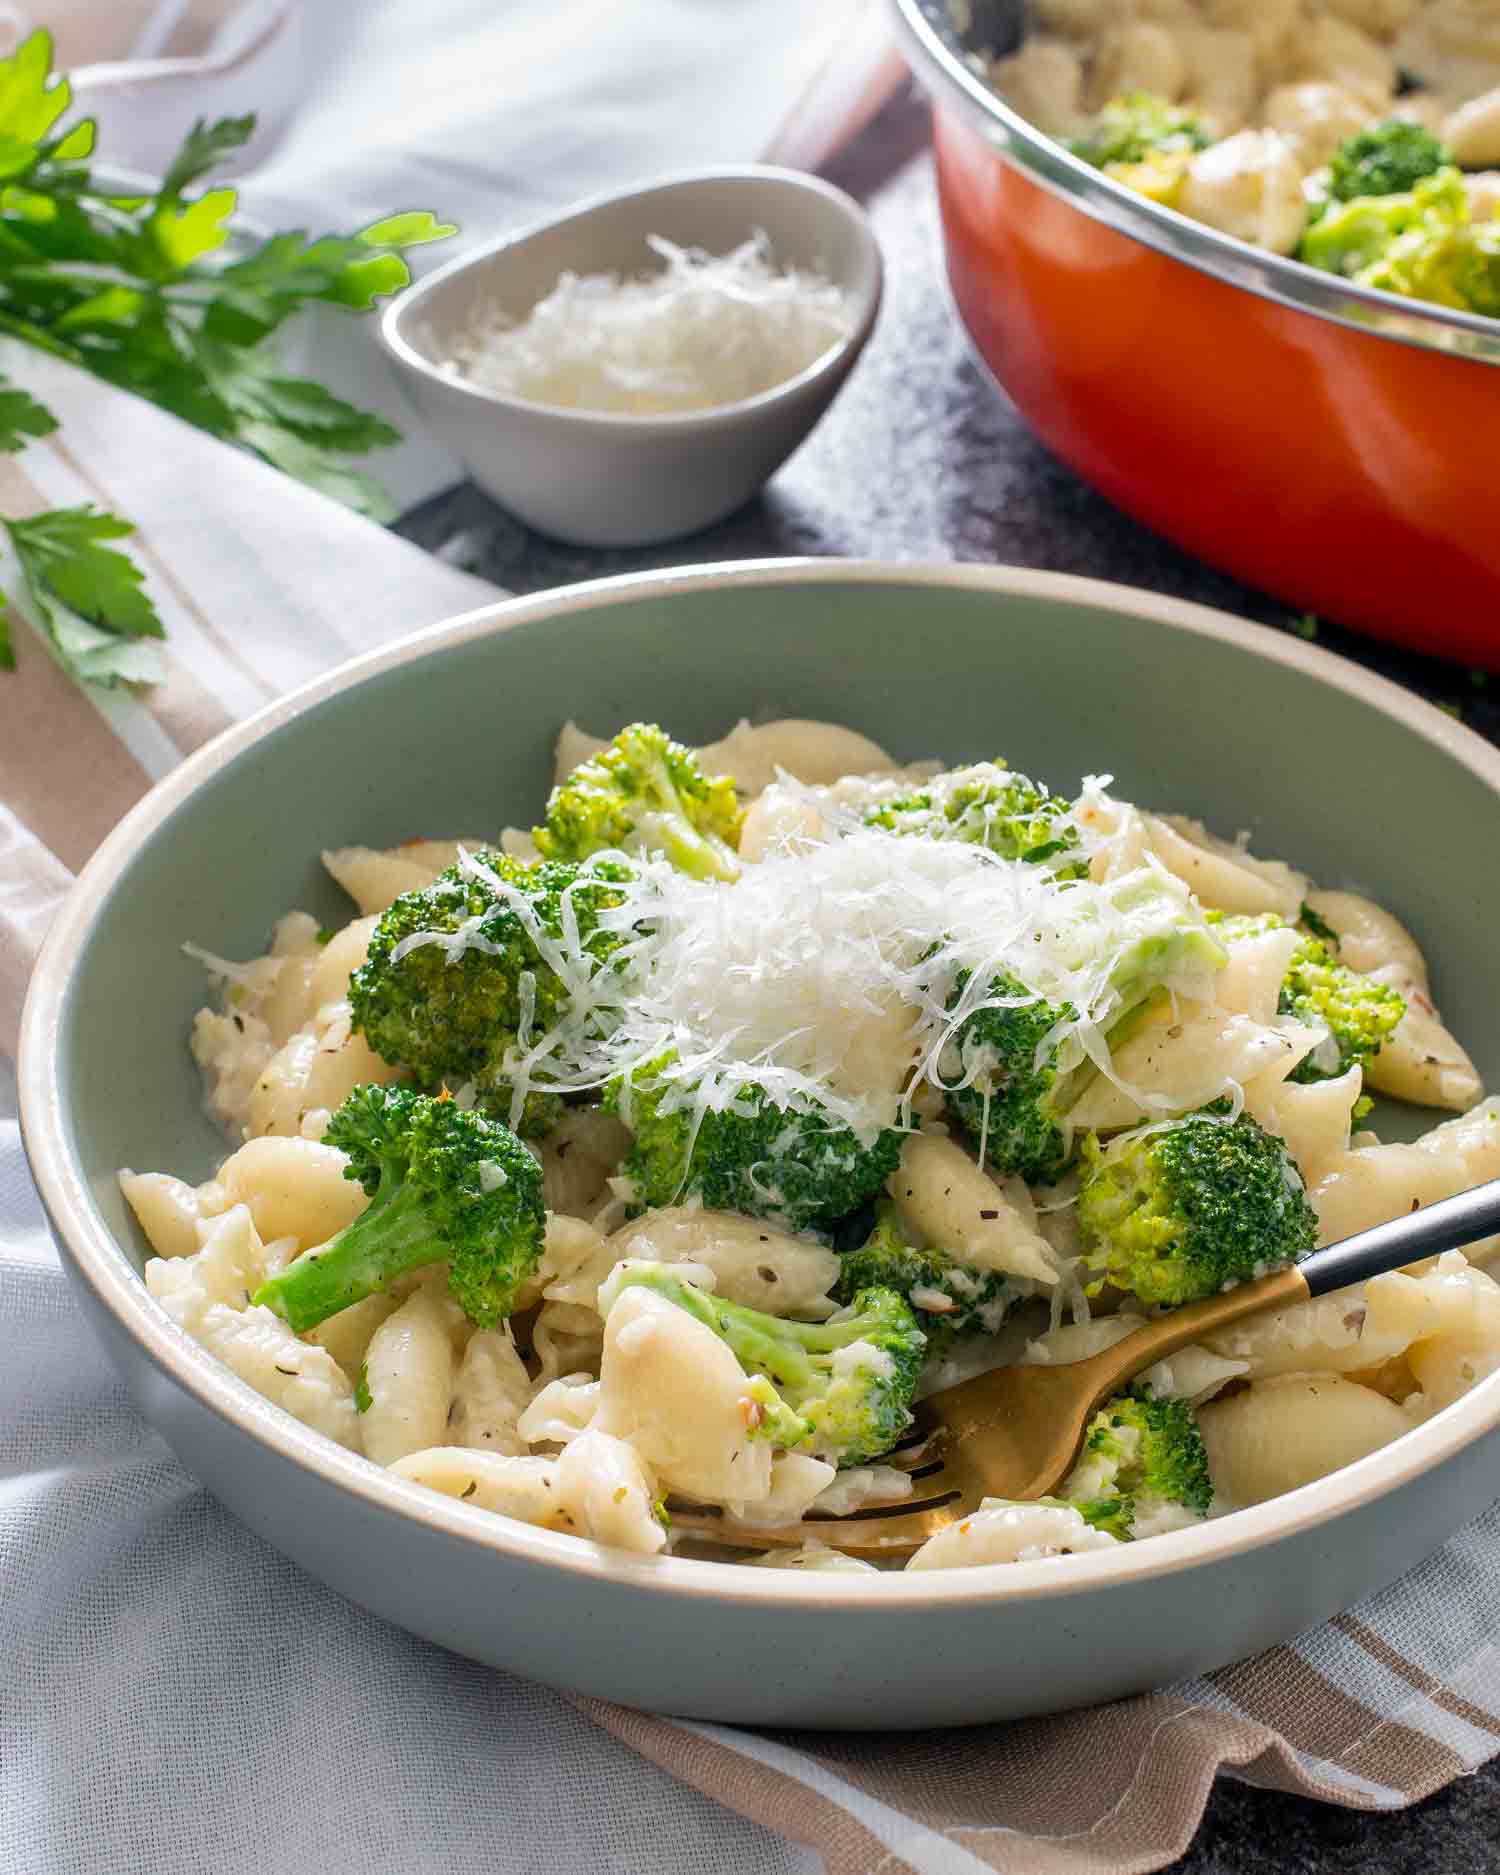 a serving of creamy broccoli pasta in a bowl garnished with parmesan cheese.